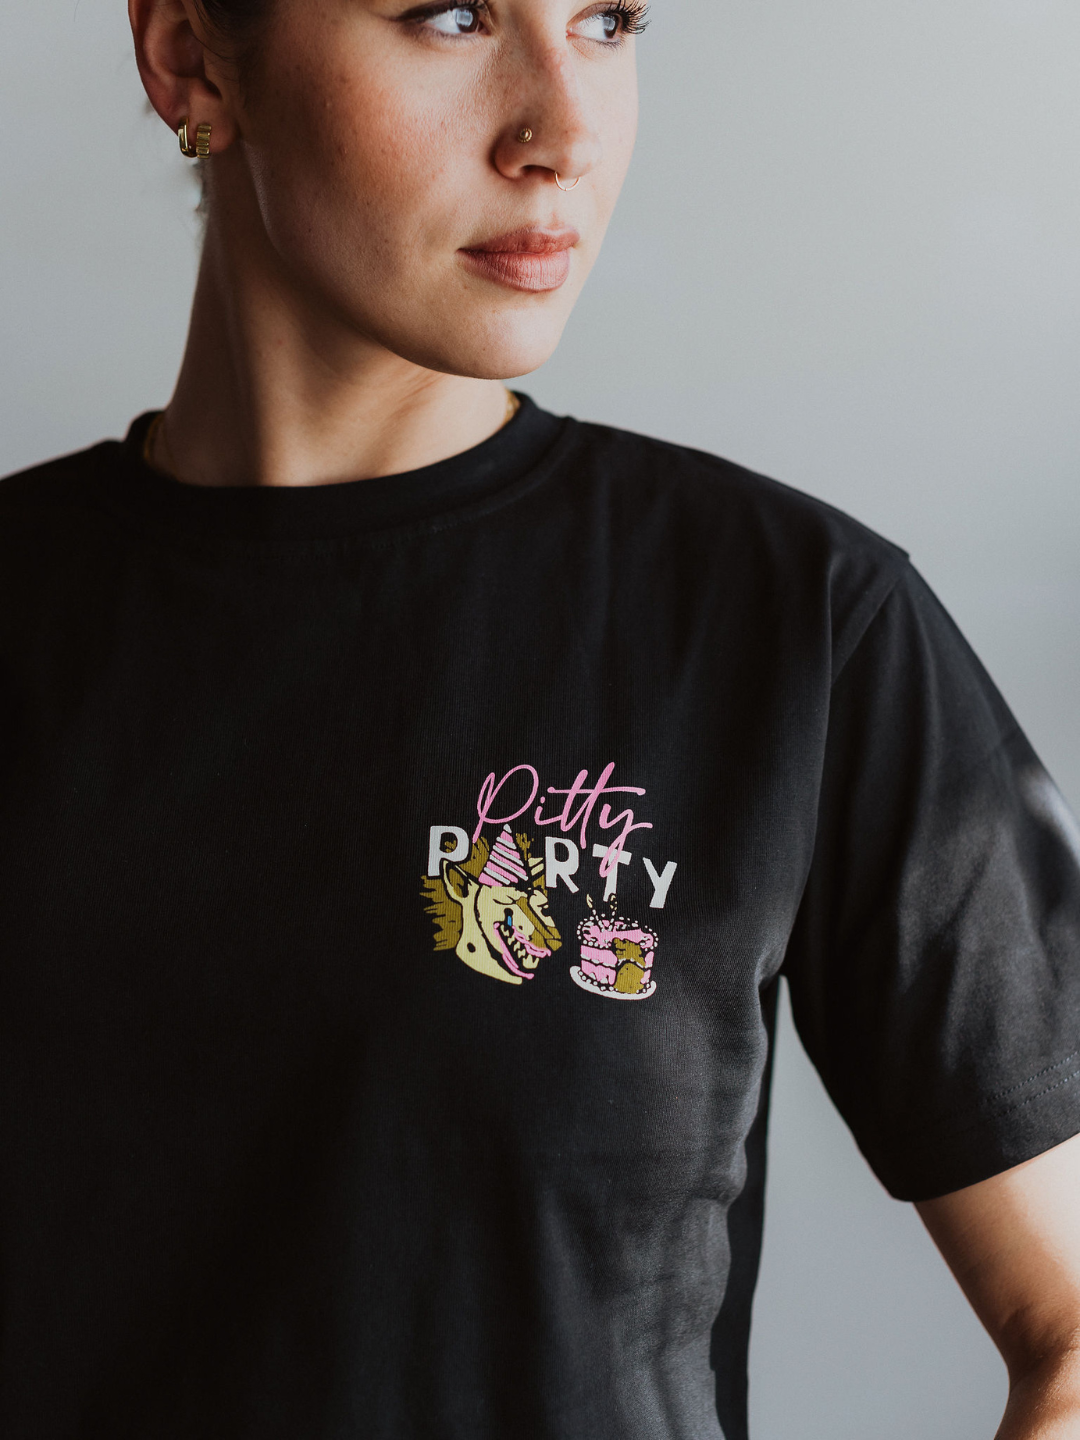 Pity Party T-Shirt - Octopied Mind